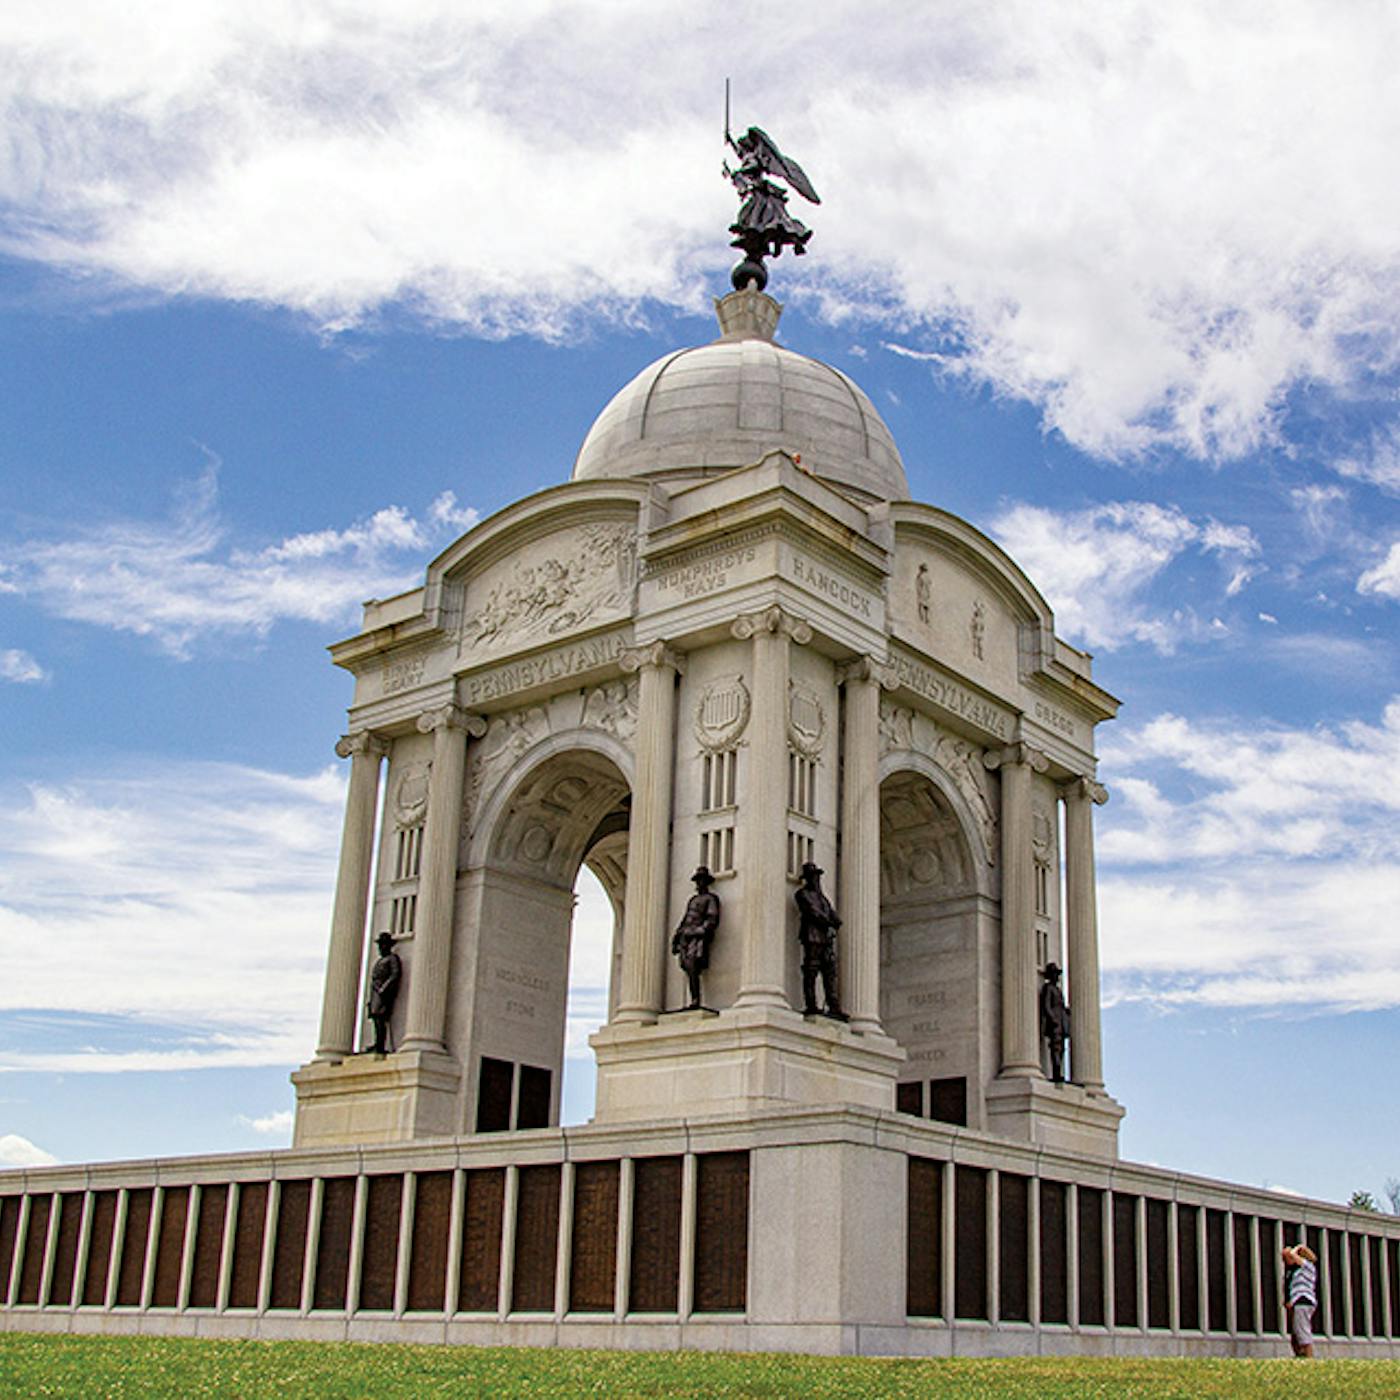 Memorial at Gettysburg National Military Park in Gettysburg, Pennsylvania (photo courtesy of National Park Service))